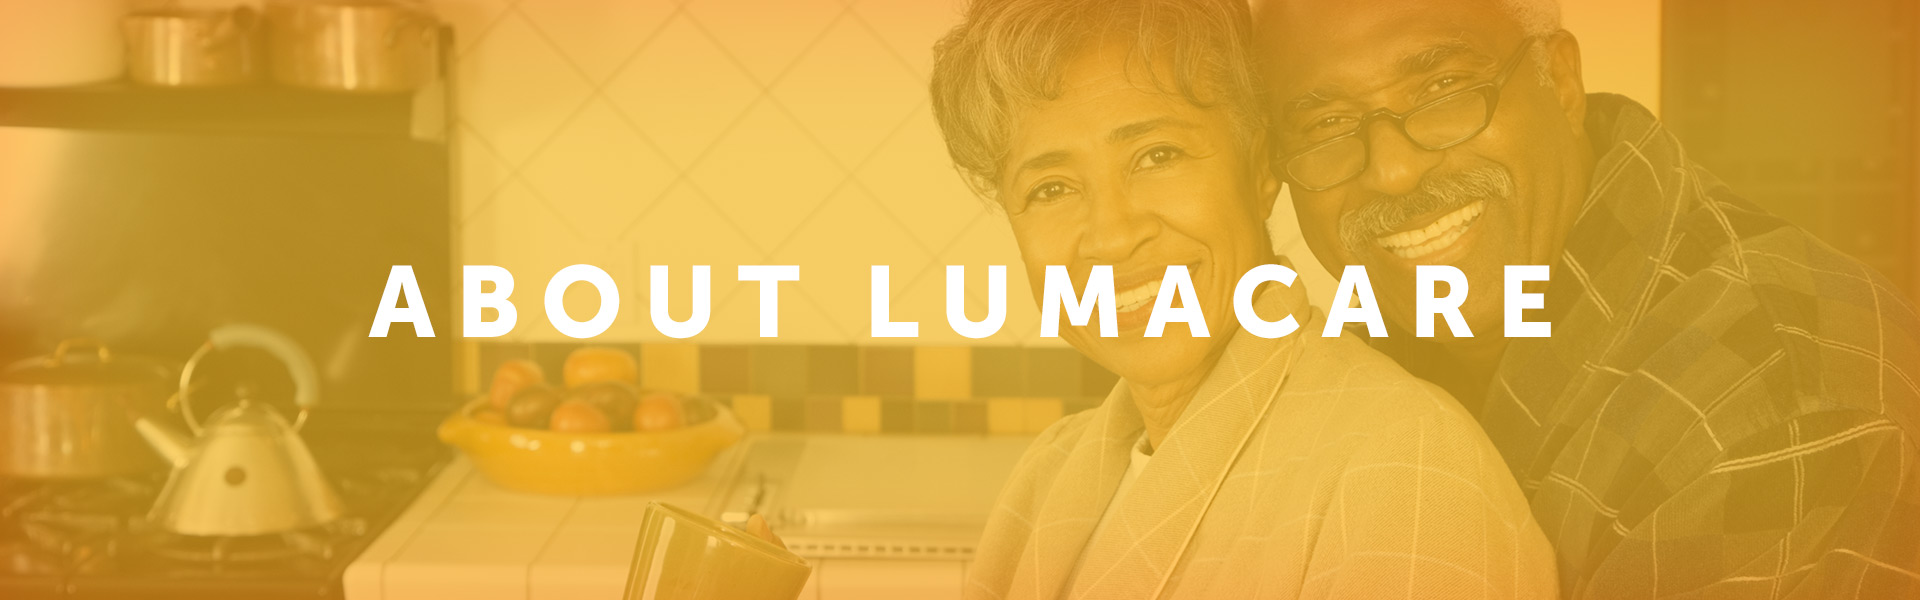 About Lumacare